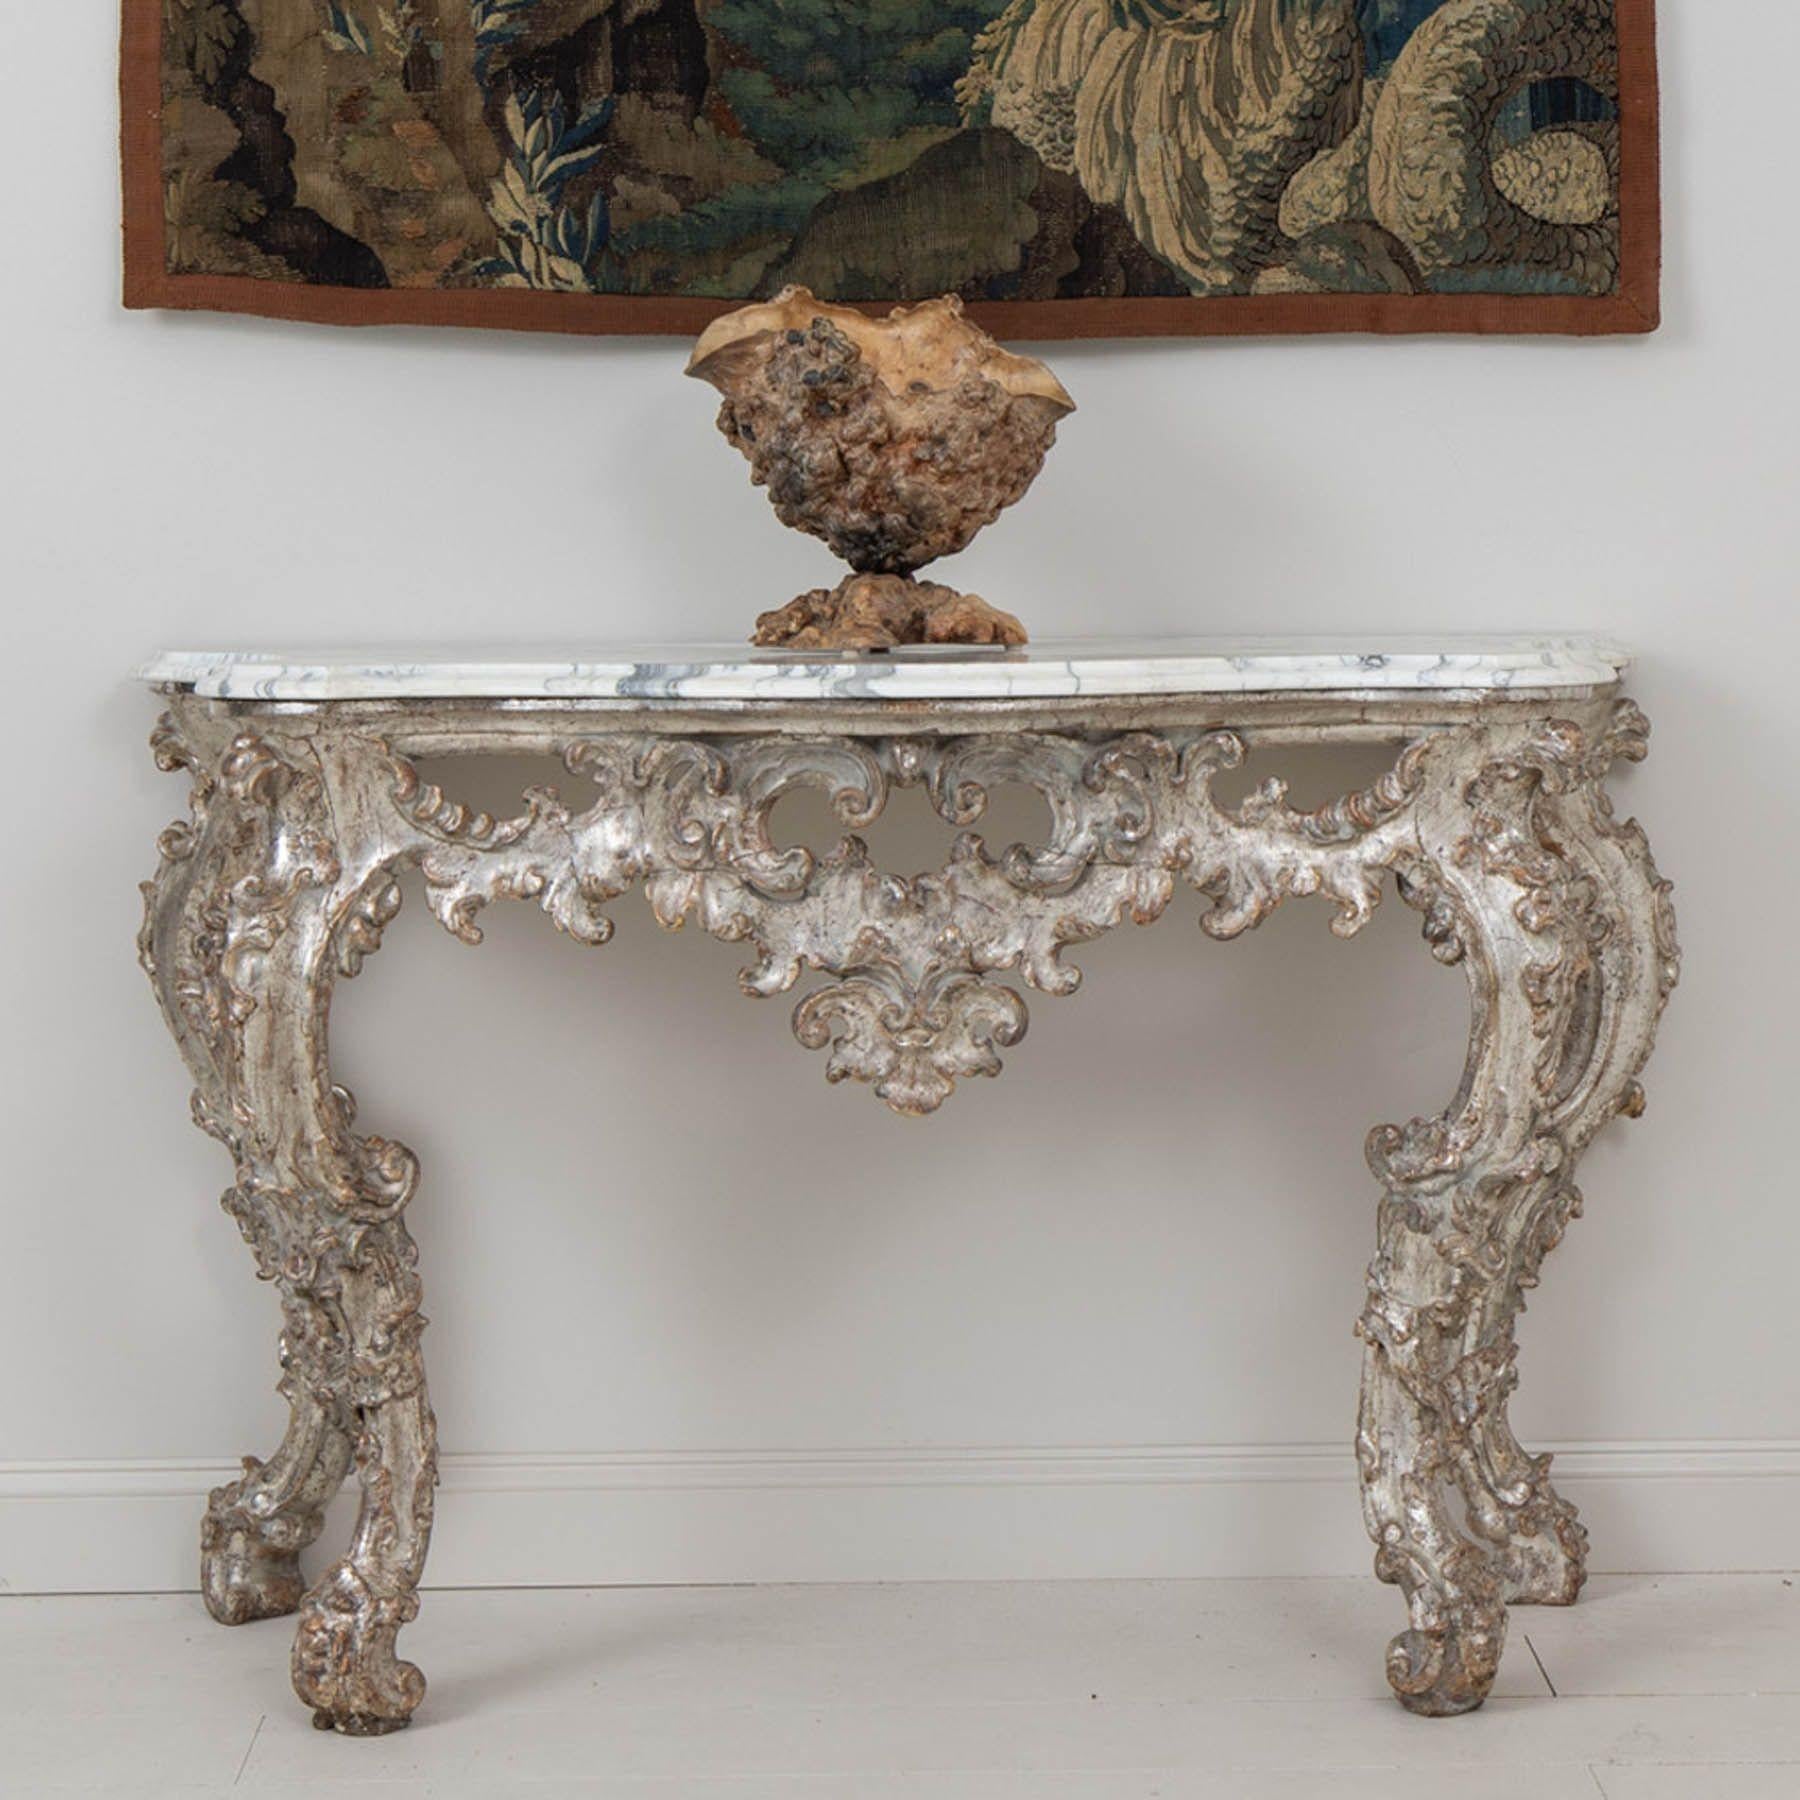 An Italian console in original parcel silver leaf beautifully carved with an Arabescato marble top from Tuscany, 18th century, circa 1750. Shaped marble top. Exceptional pierced, arbalest shaped frieze with elegant foliate carvings that continue